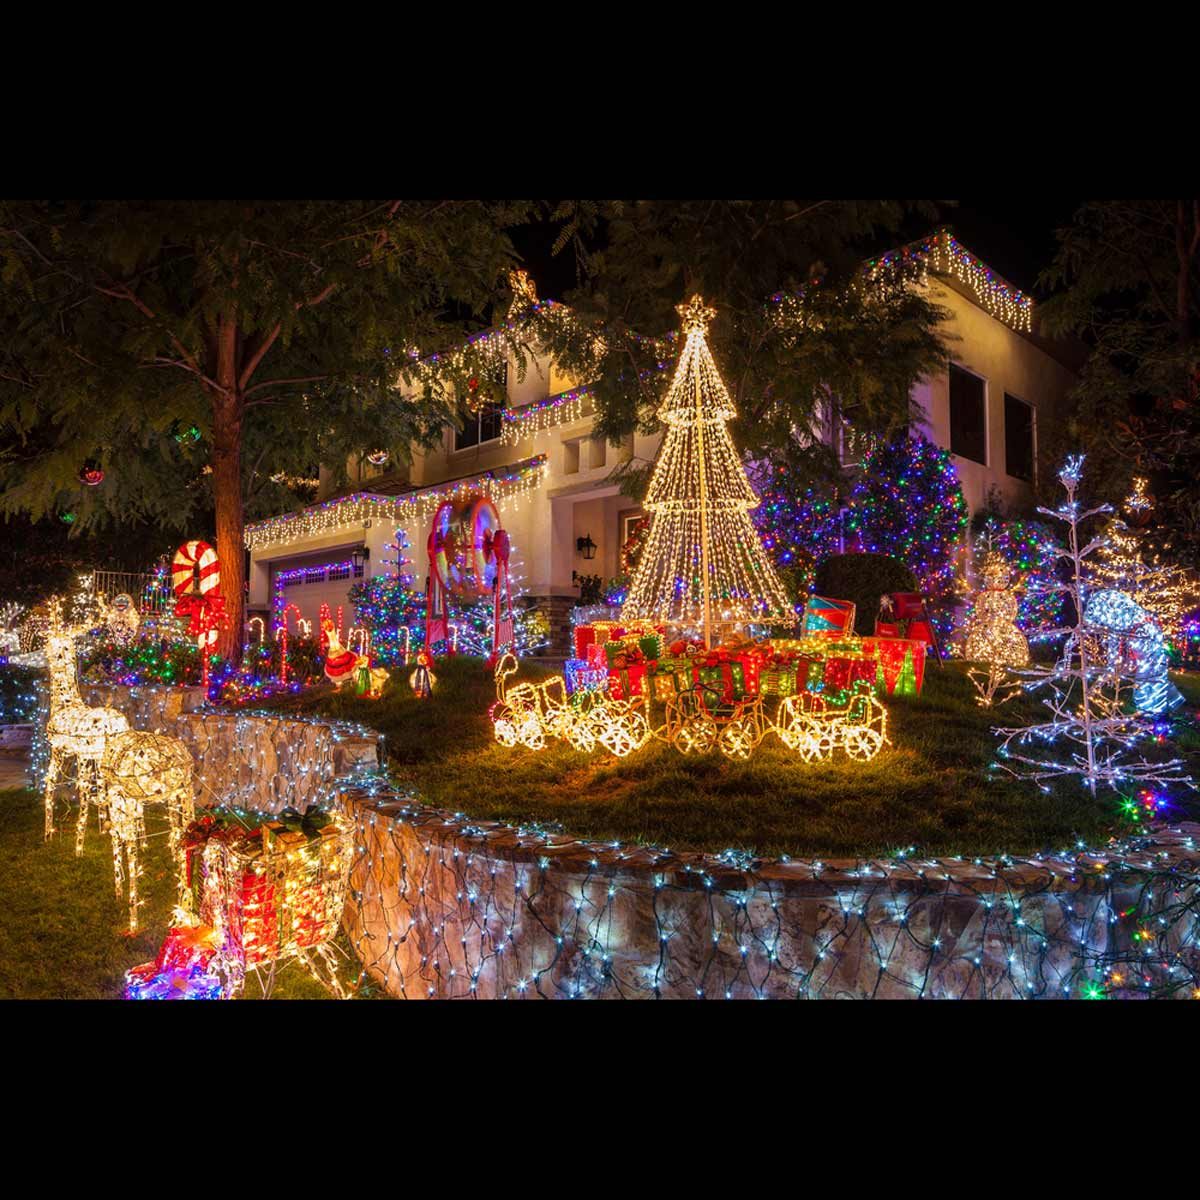 Stereotype Plante træer ligning The Most Outrageous Christmas Light Displays of All Time | Family Handyman